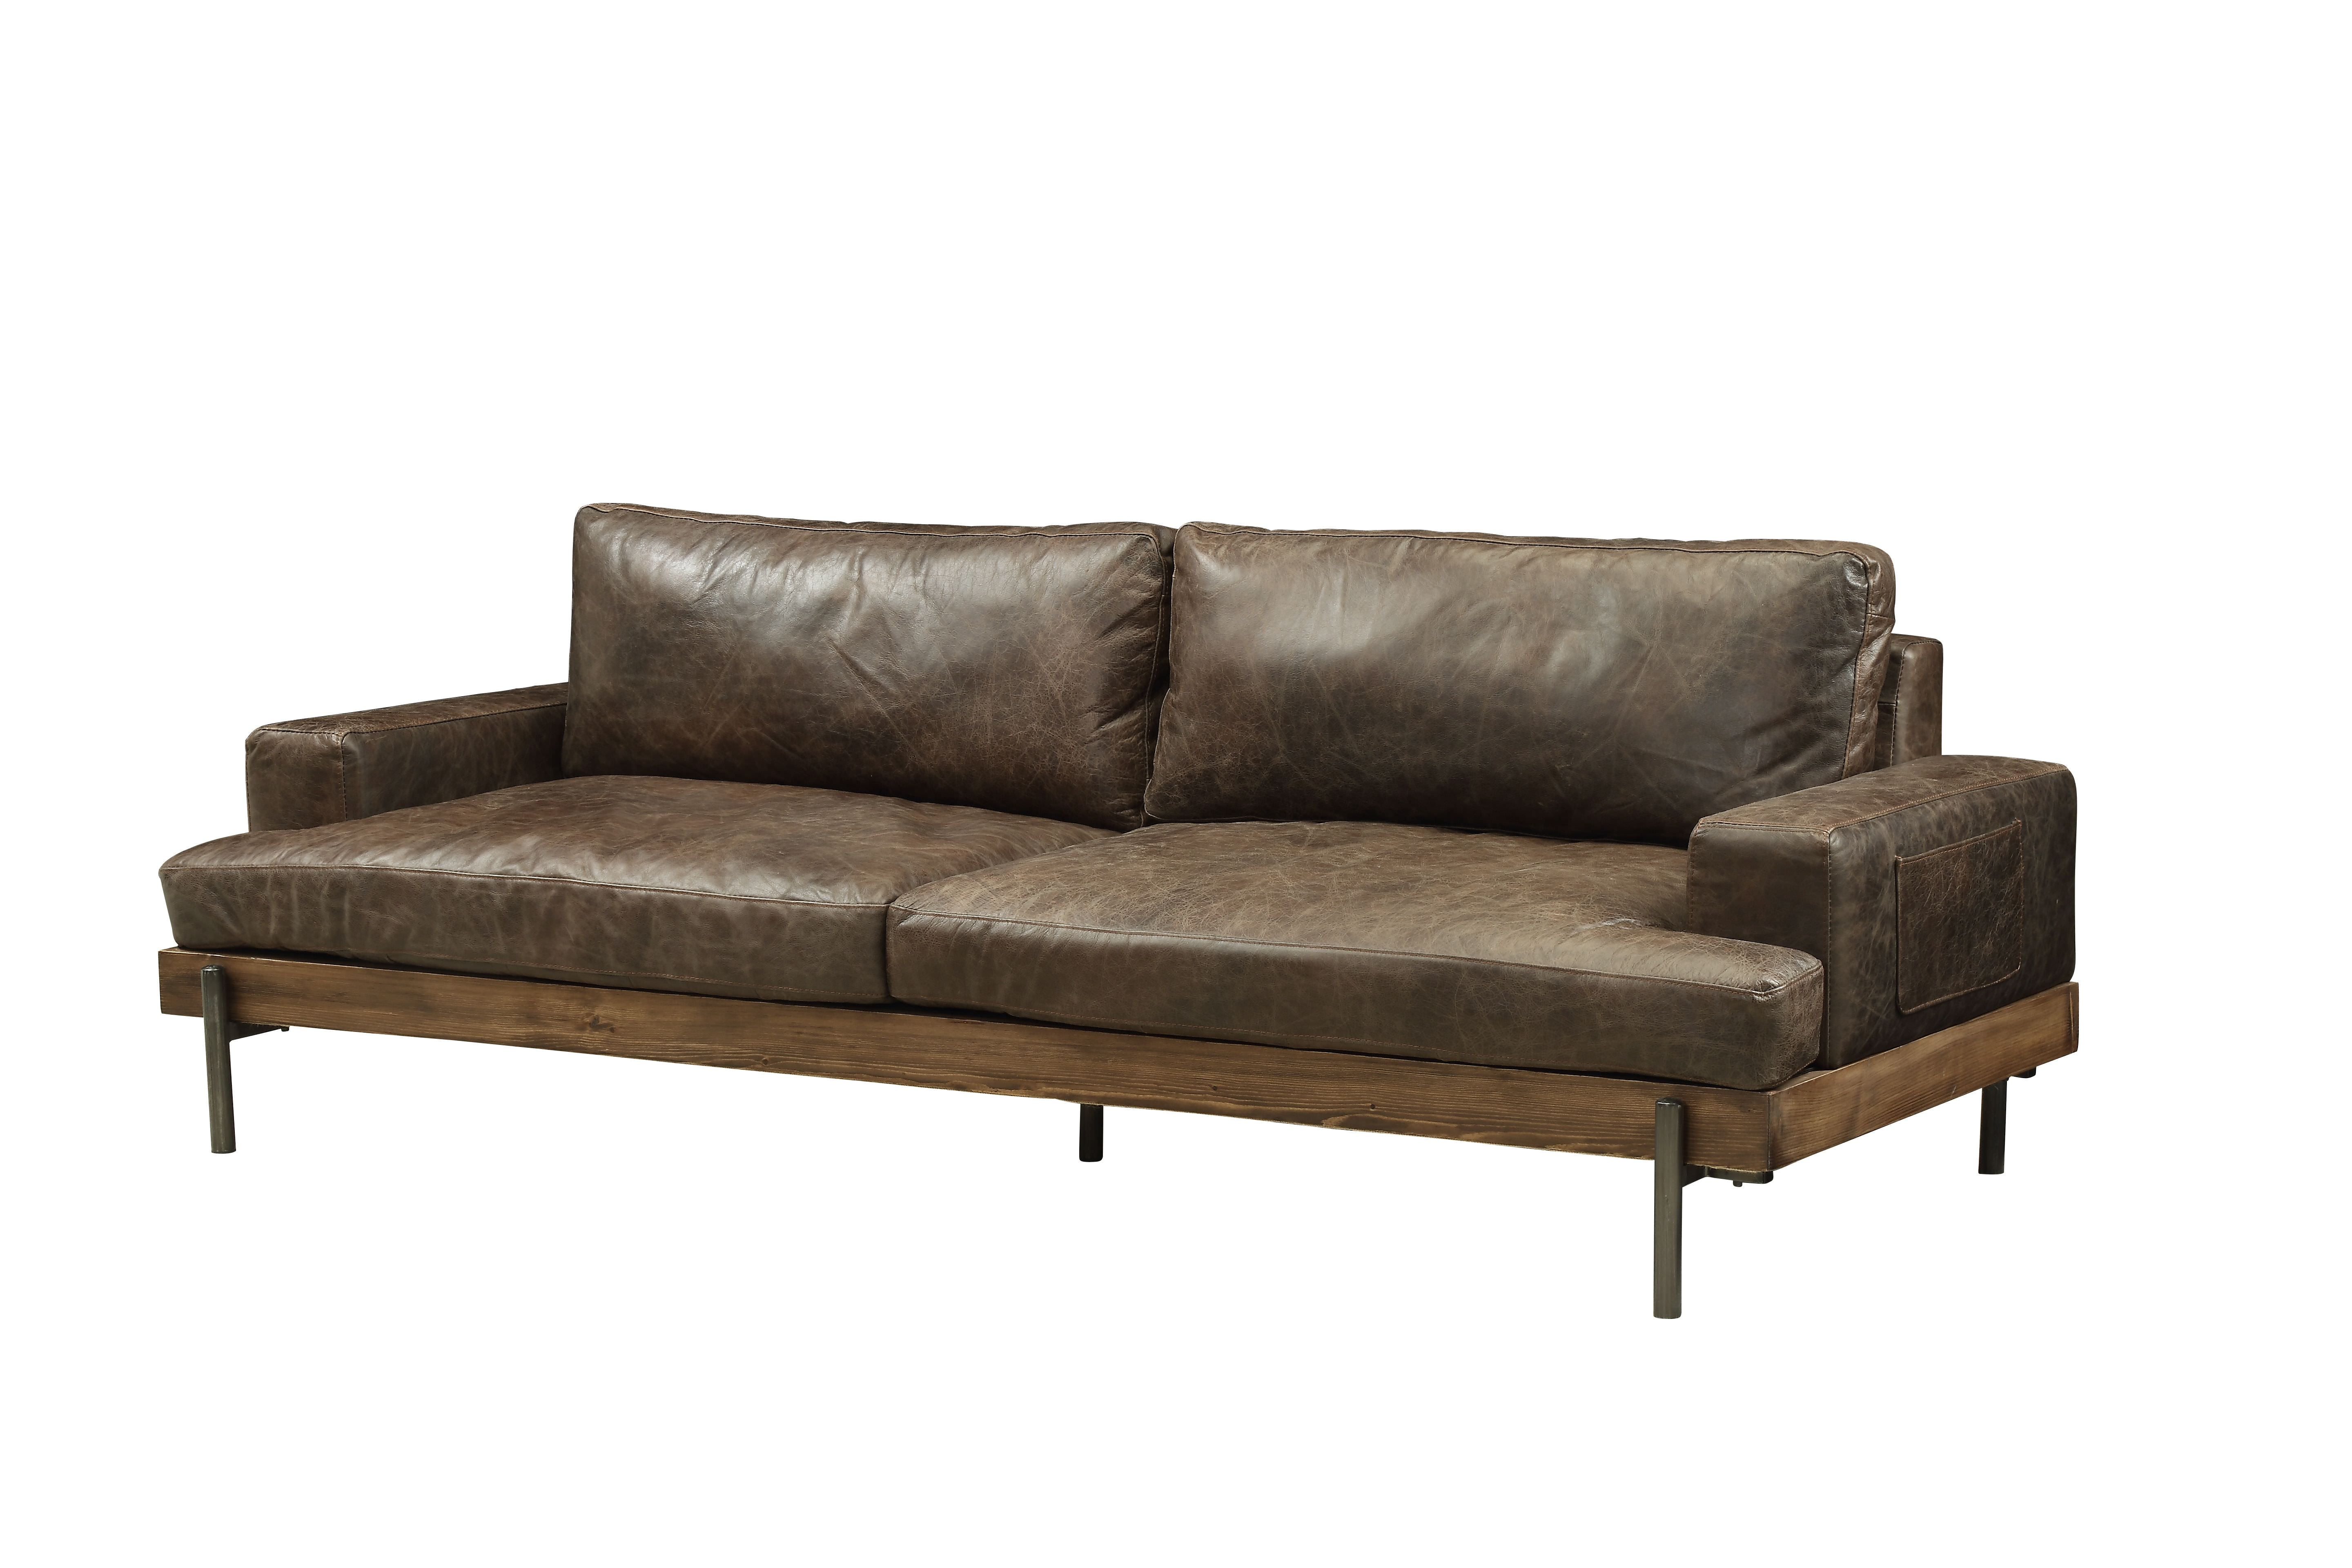 Picture of ACME 52475 Silchester Sofa - Oak & Distress Chocolate Top Grain Leather - 32 x 95 x 39 in.